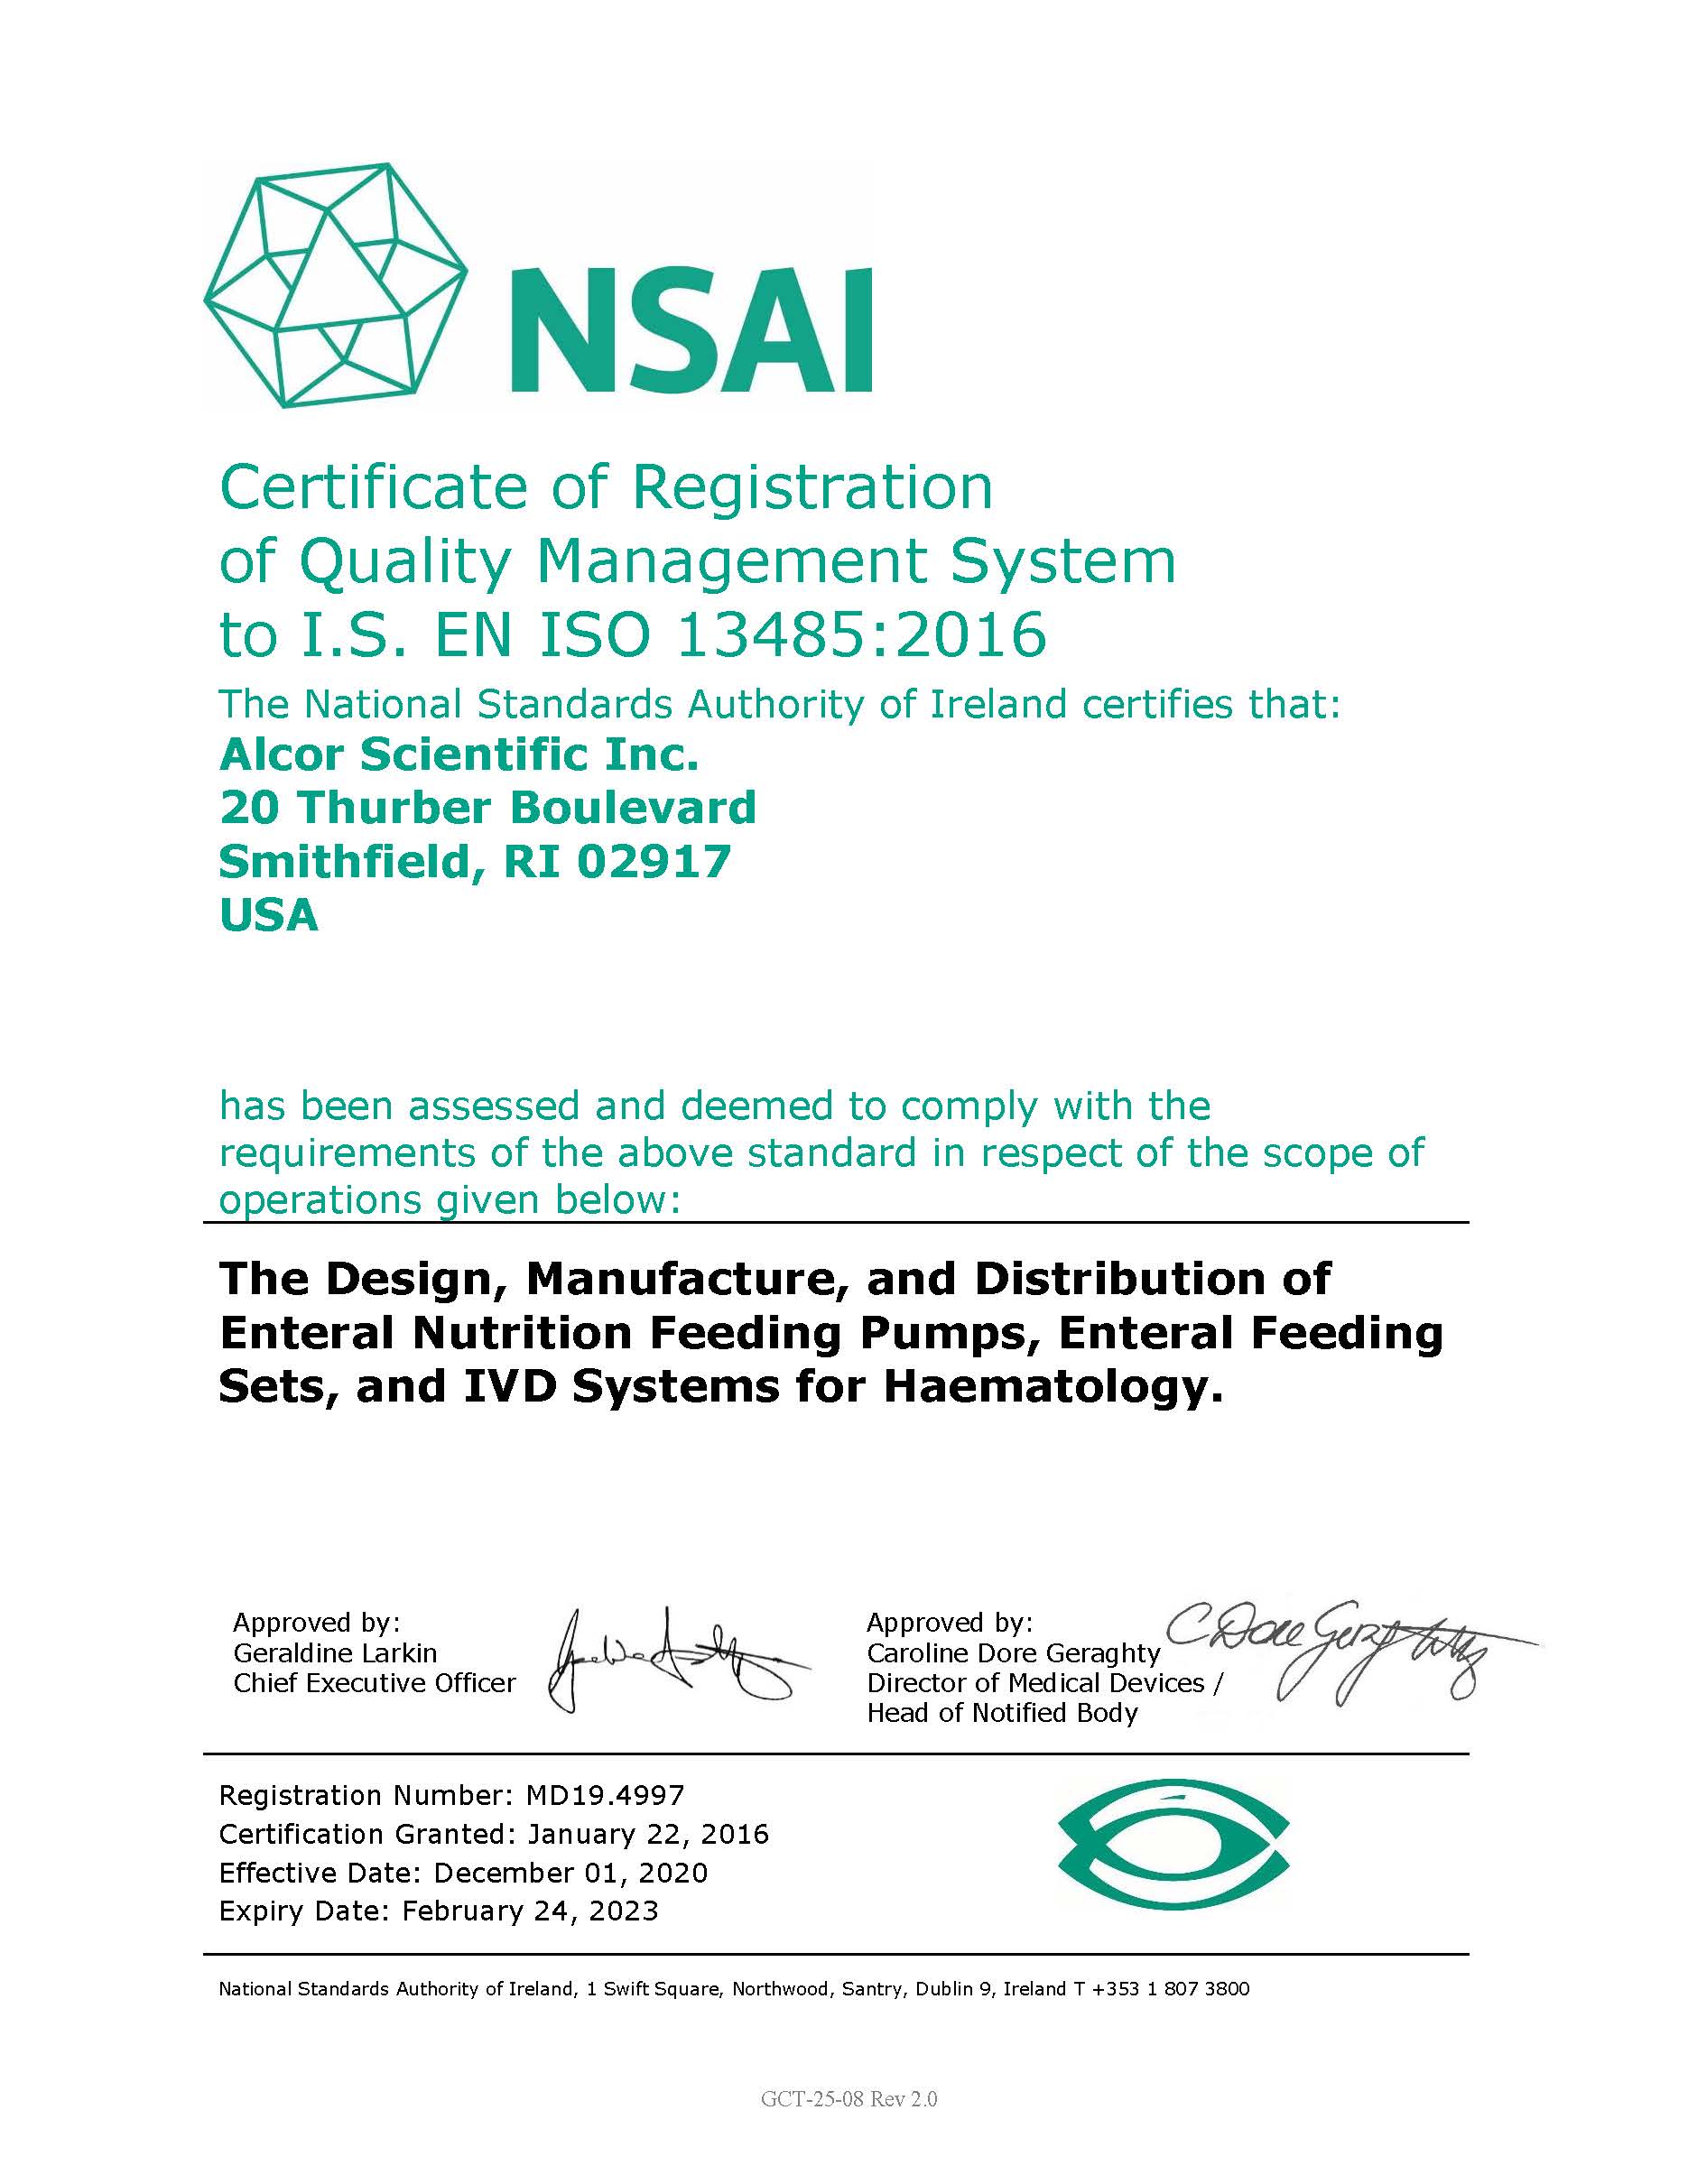 Copy of the Certificate of Registration of Quality Management System to I.S. EN ISO 13485:2016.